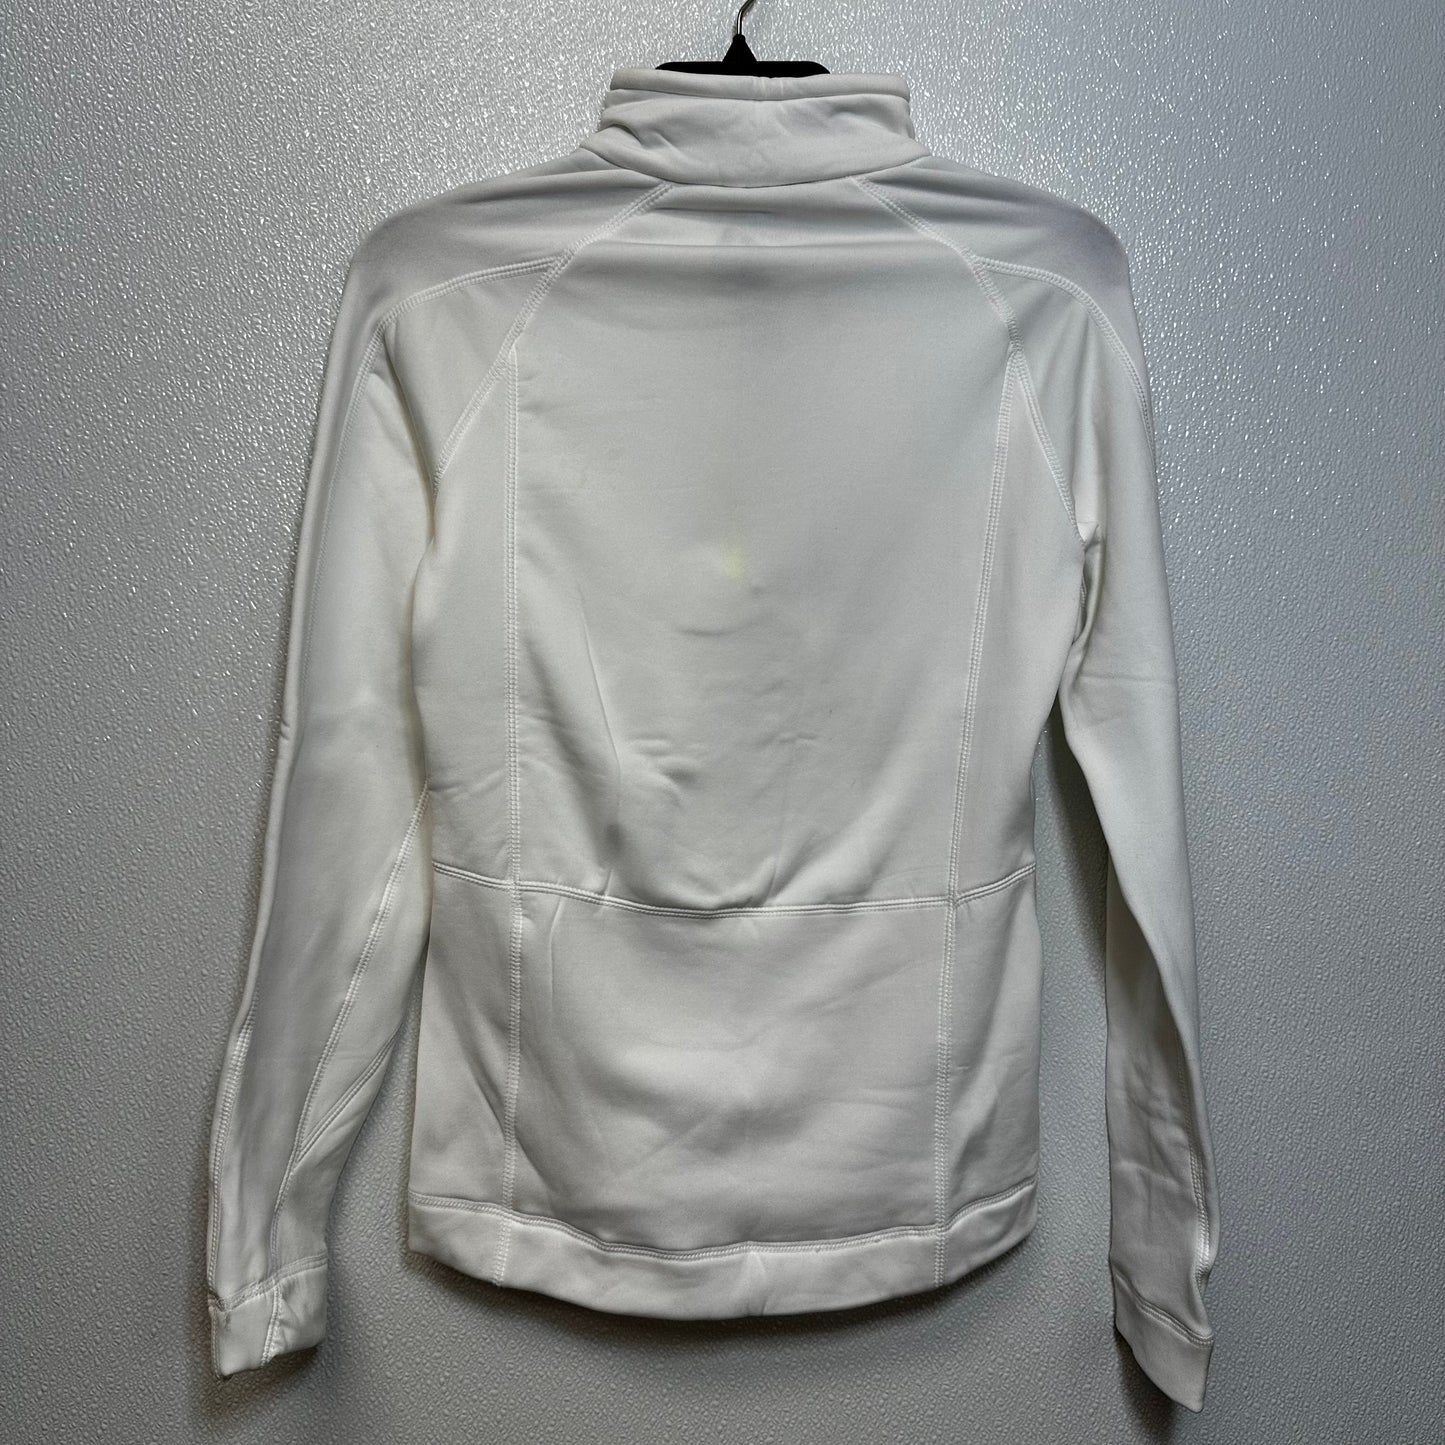 White Athletic Top Long Sleeve Collar Avalanche, Size S